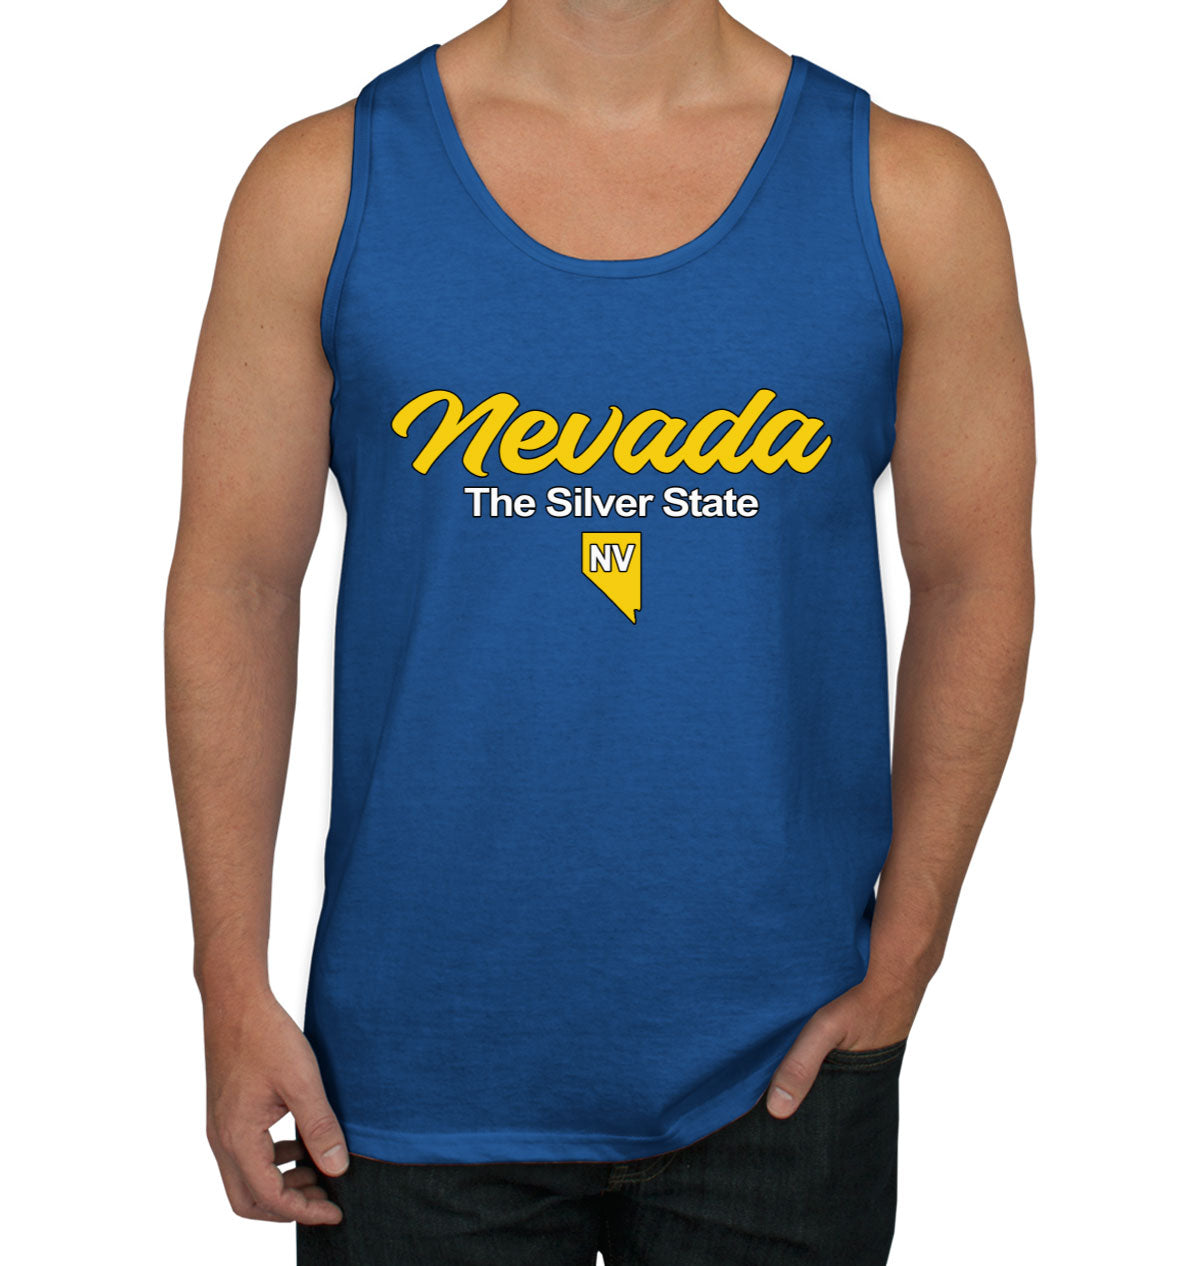 Nevada The Silver State Men's Tank Top